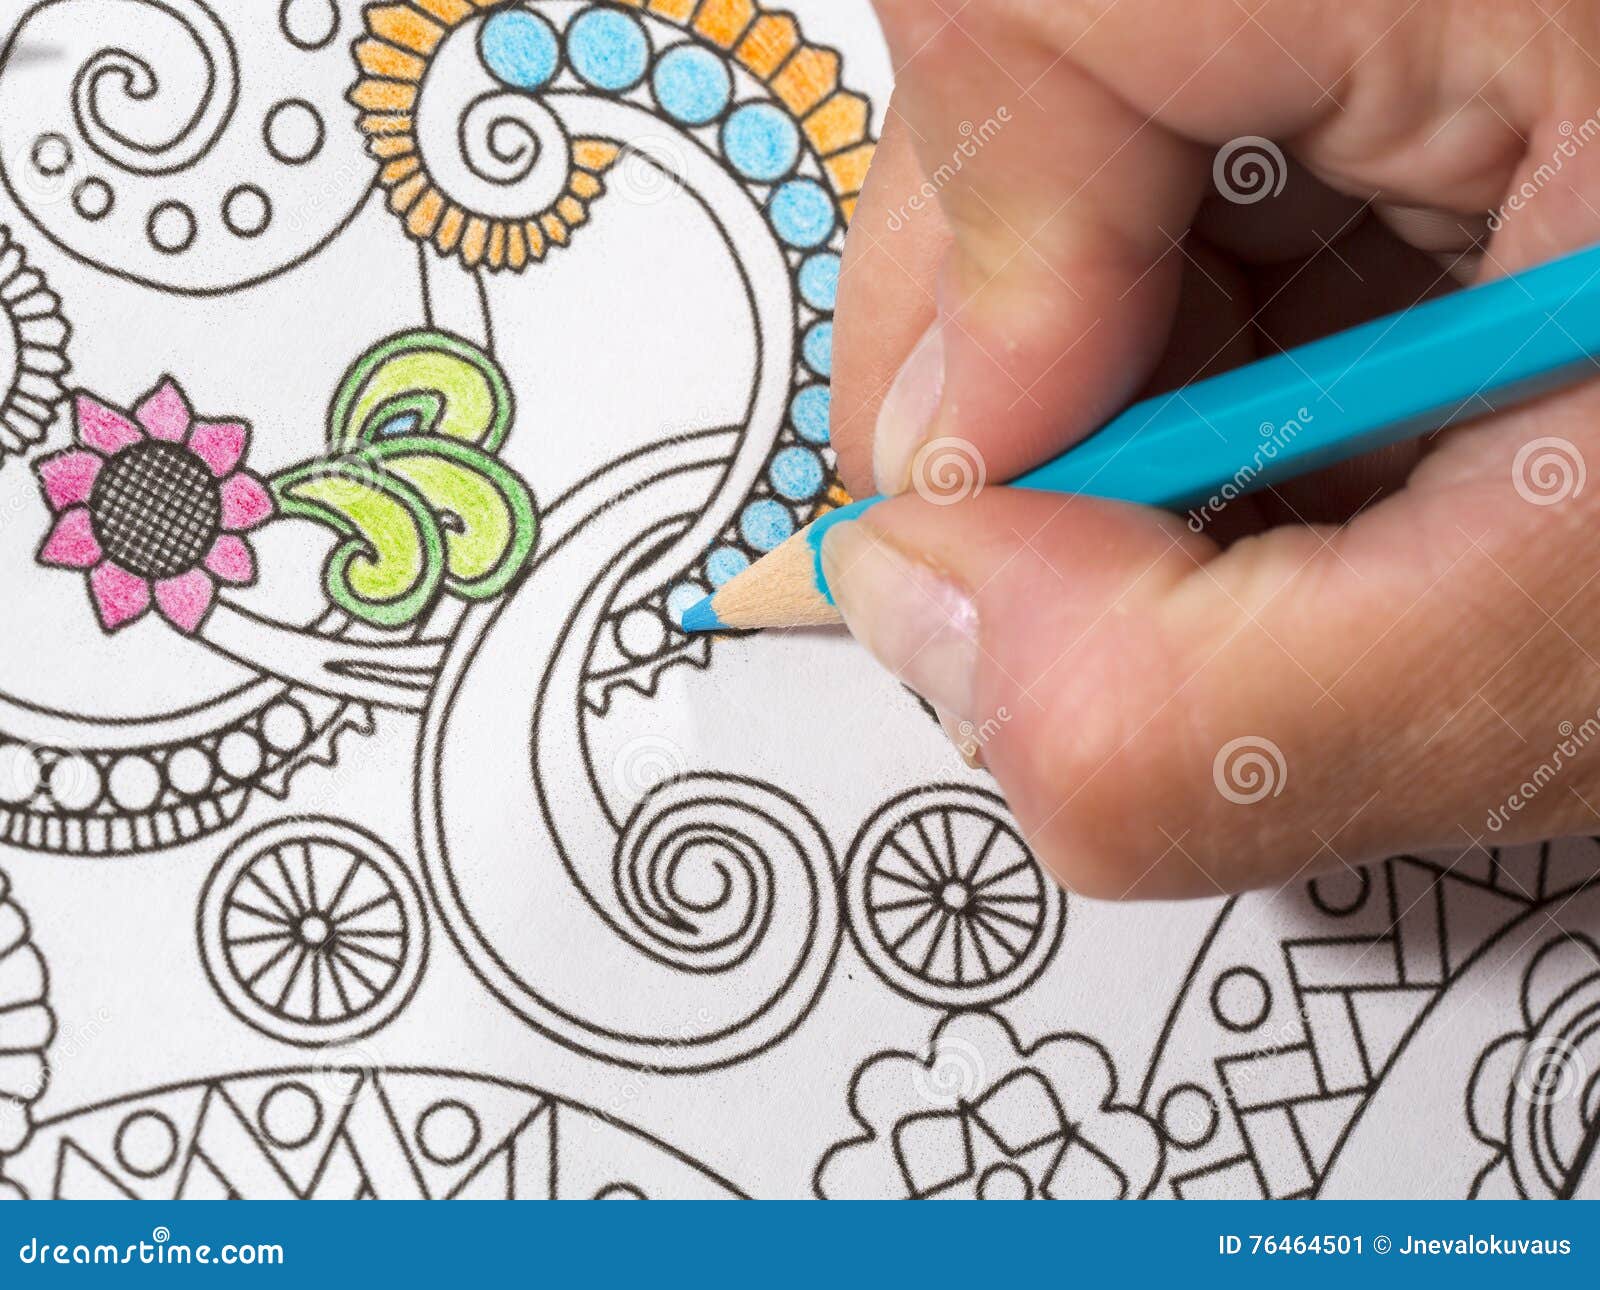 https://thumbs.dreamstime.com/z/adult-coloring-book-colorful-pencils-image-new-trendy-thing-called-adults-idea-person-illustrative-76464501.jpg